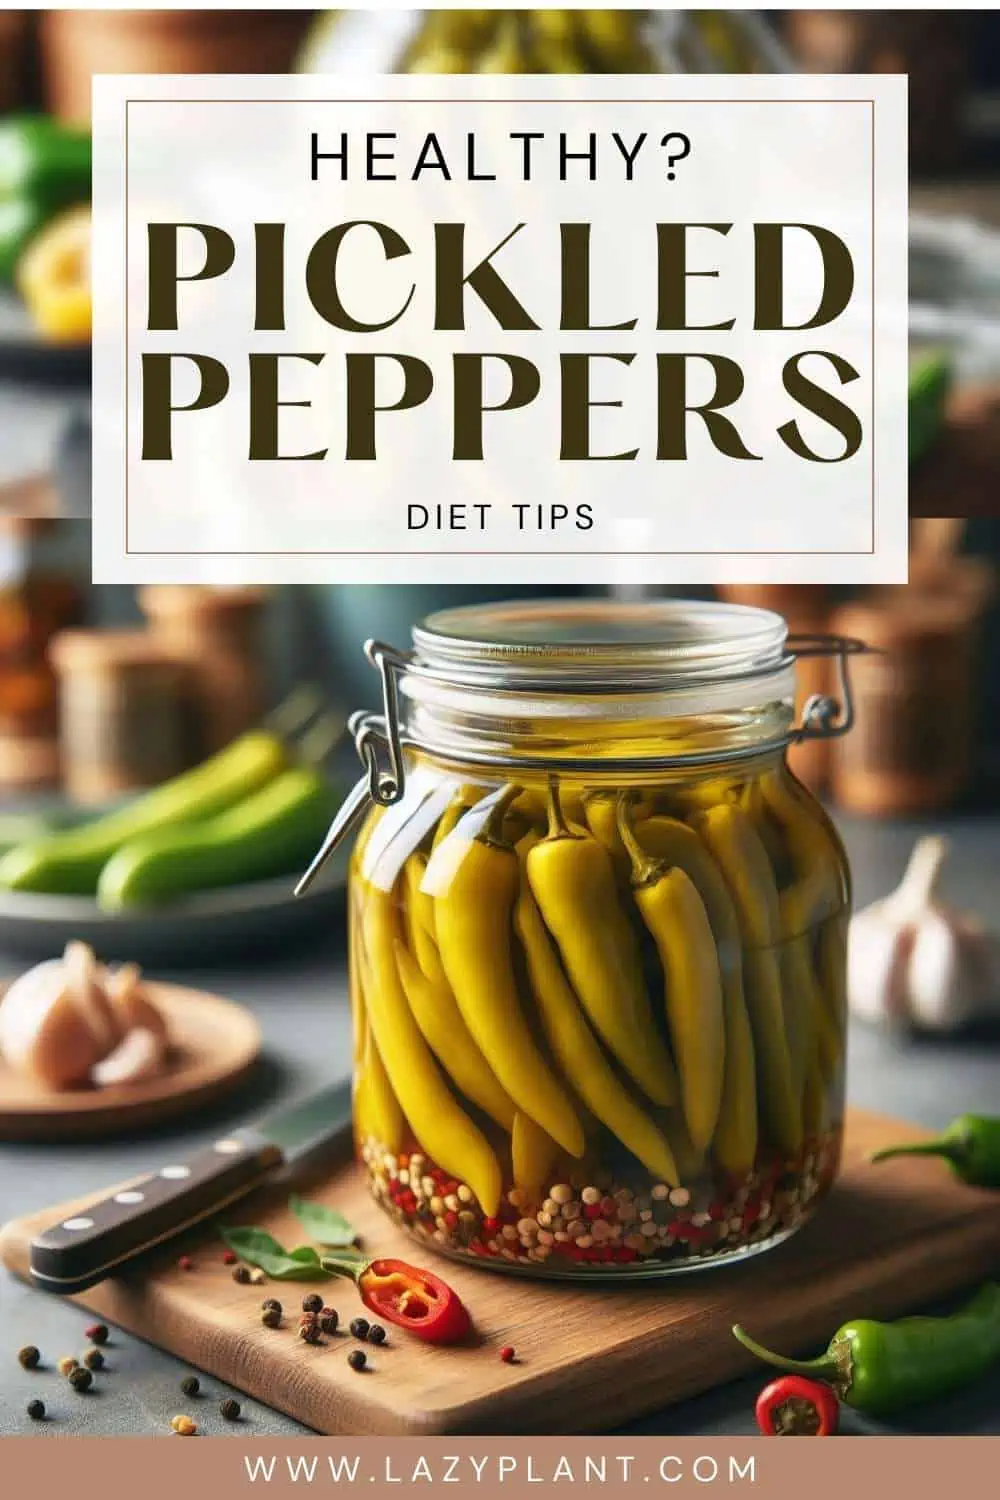 Are pickled peppers healthy?